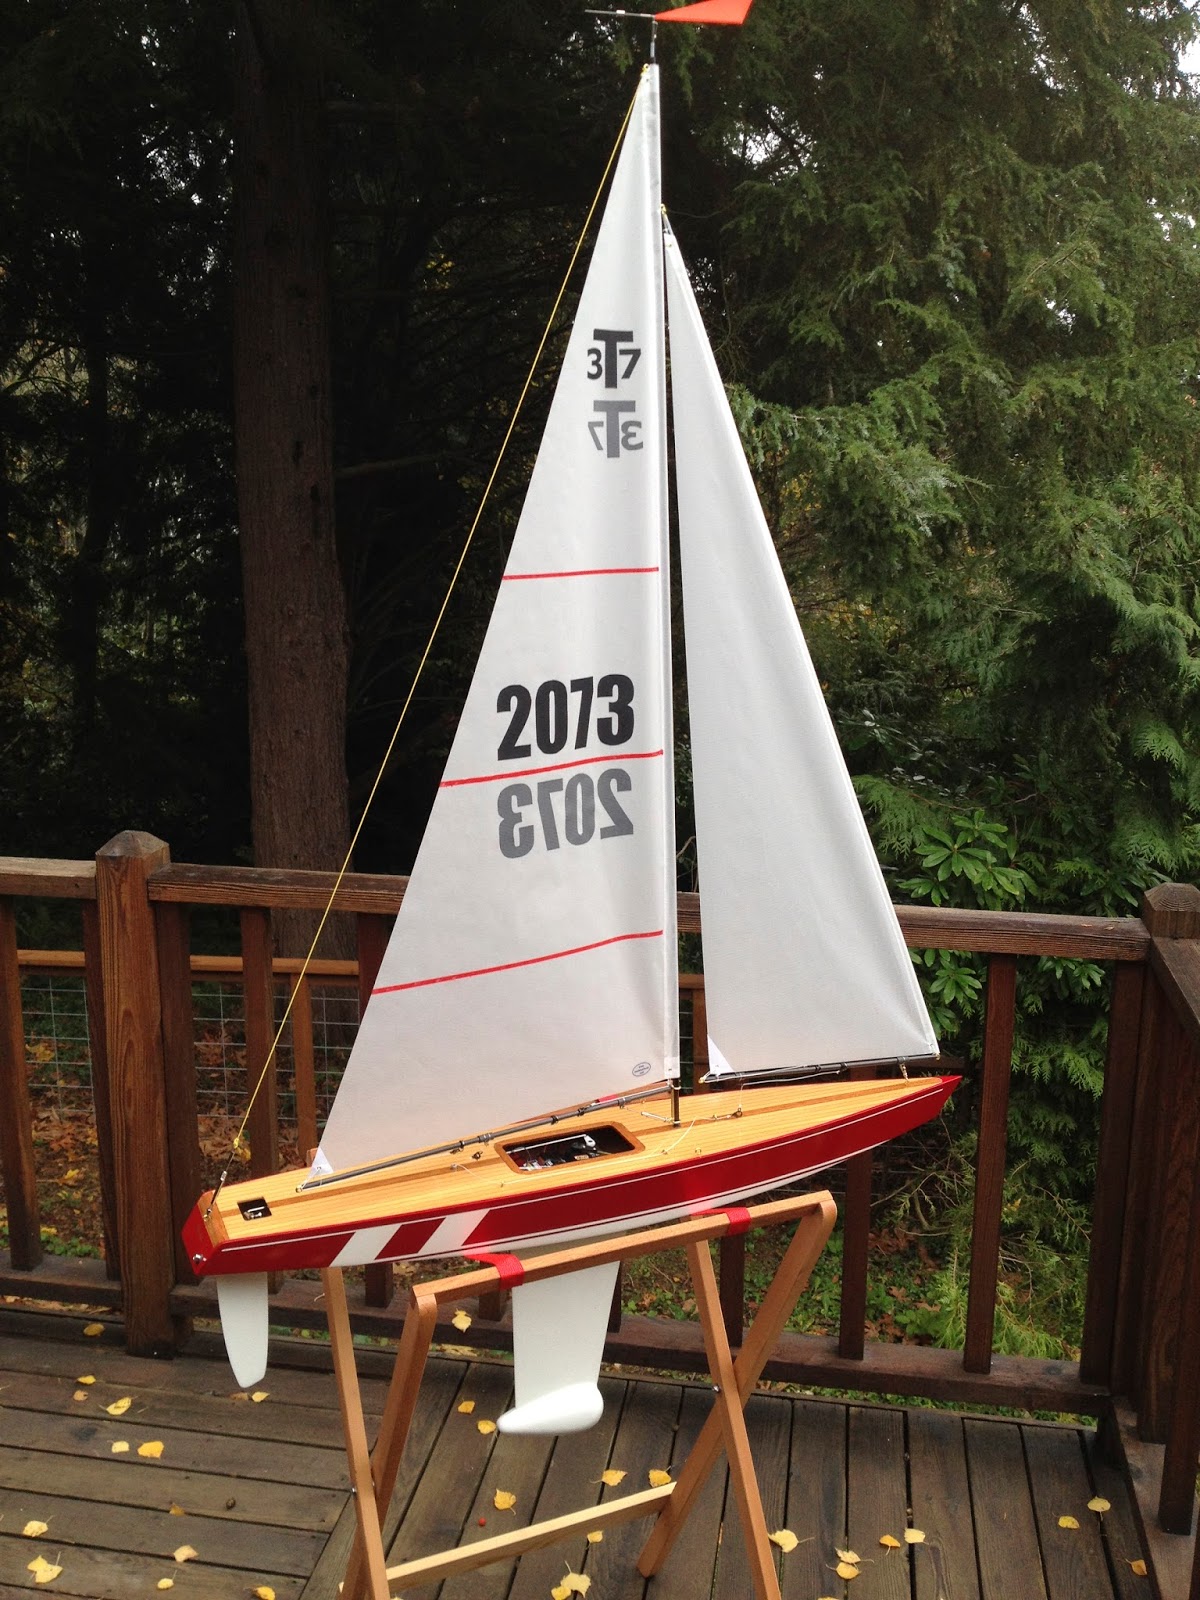 T37 RC Sailboat for Sale (and SAIL)!